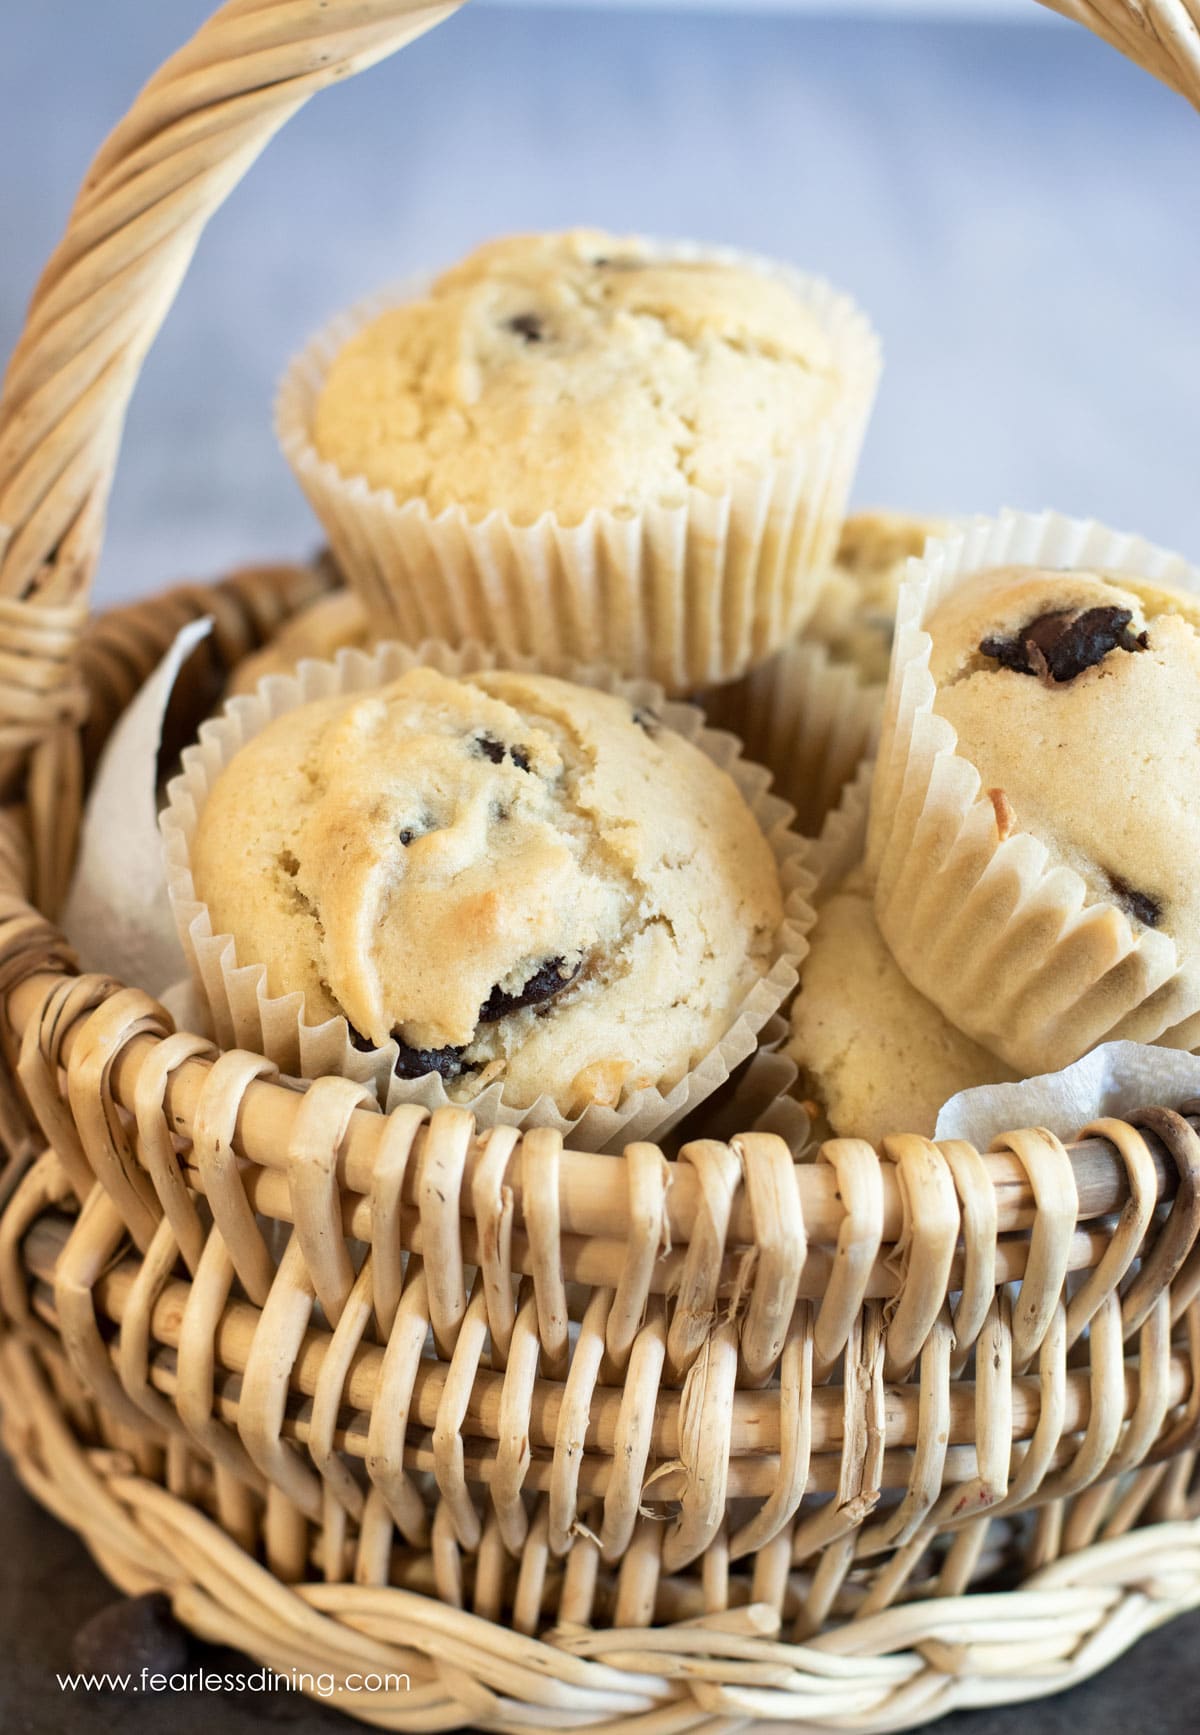 A basket full of vegan chocolate chip muffins.